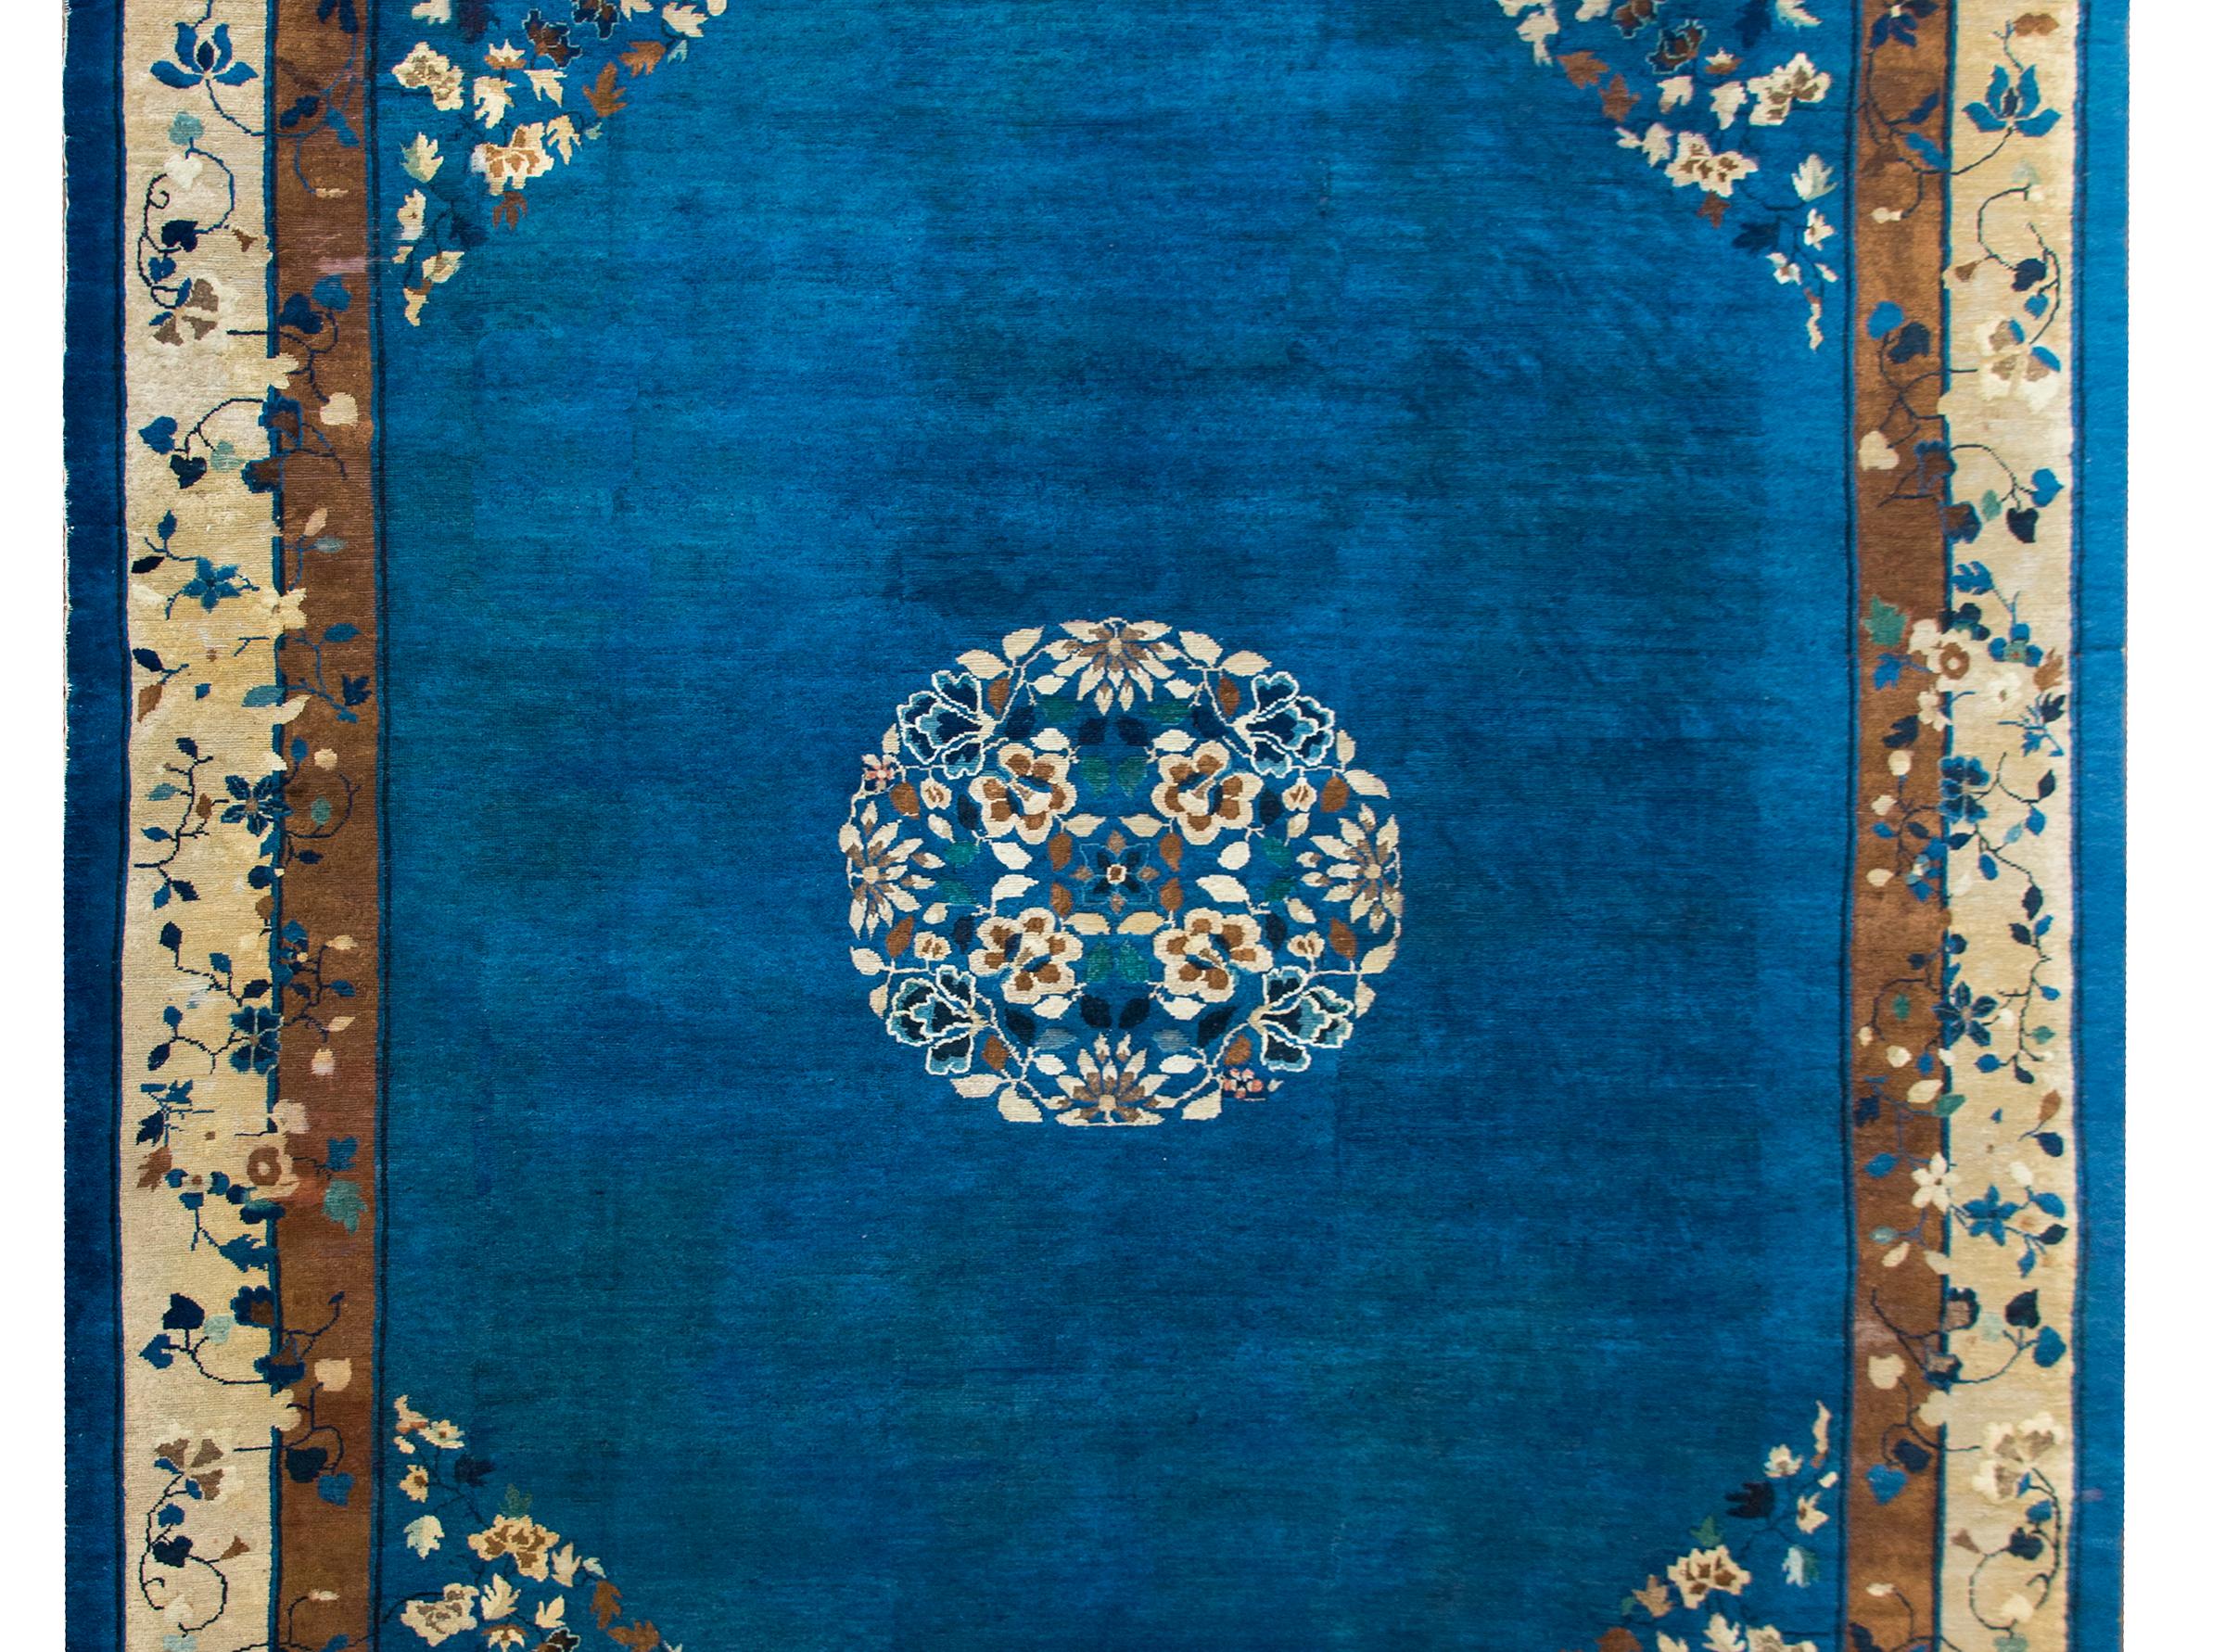 A wonderful late 19th century Chinese Peking rug with a round peony, chrysanthemum, and cherry blossom medallion set against an indigo background, and surrounded by a complex border with brown, cream, and indigo stripes overlaid with more scrolling